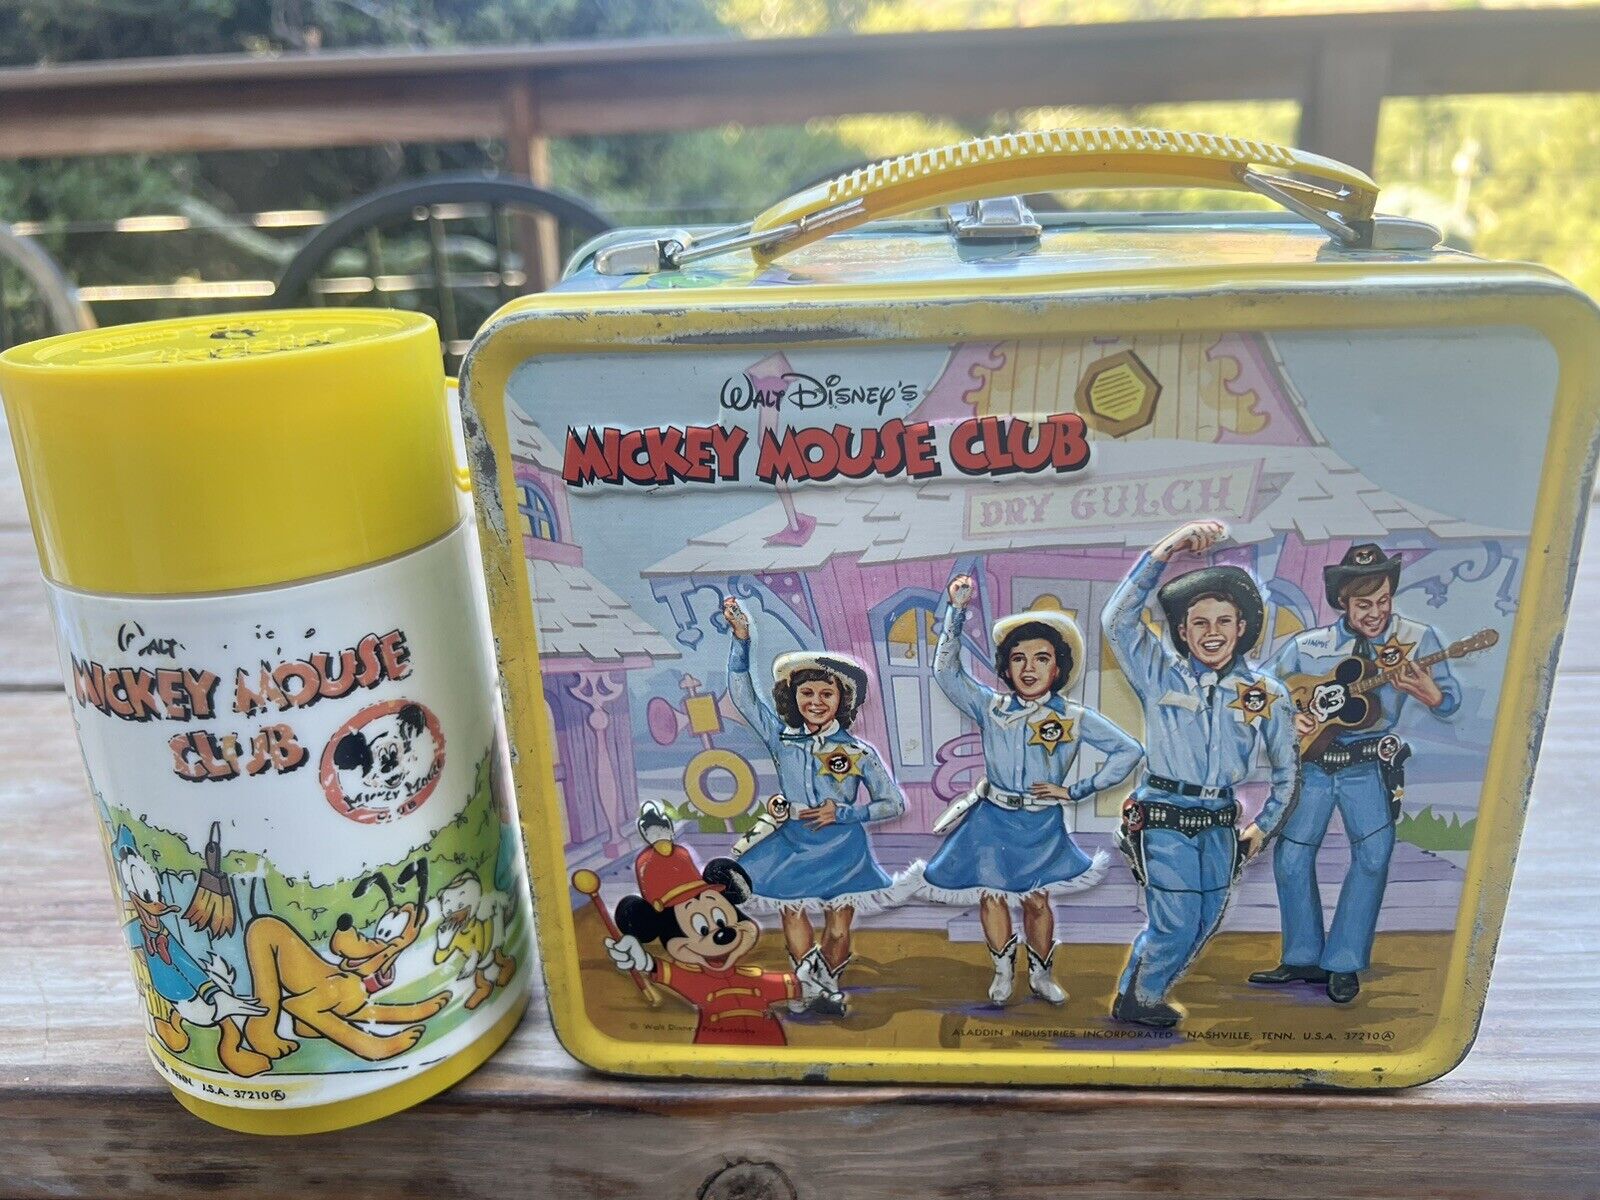 VINTAGE 1976 WALT DISNEY'S MICKEY MOUSE CLUB METAL LUNCH BOX AND THERMOS